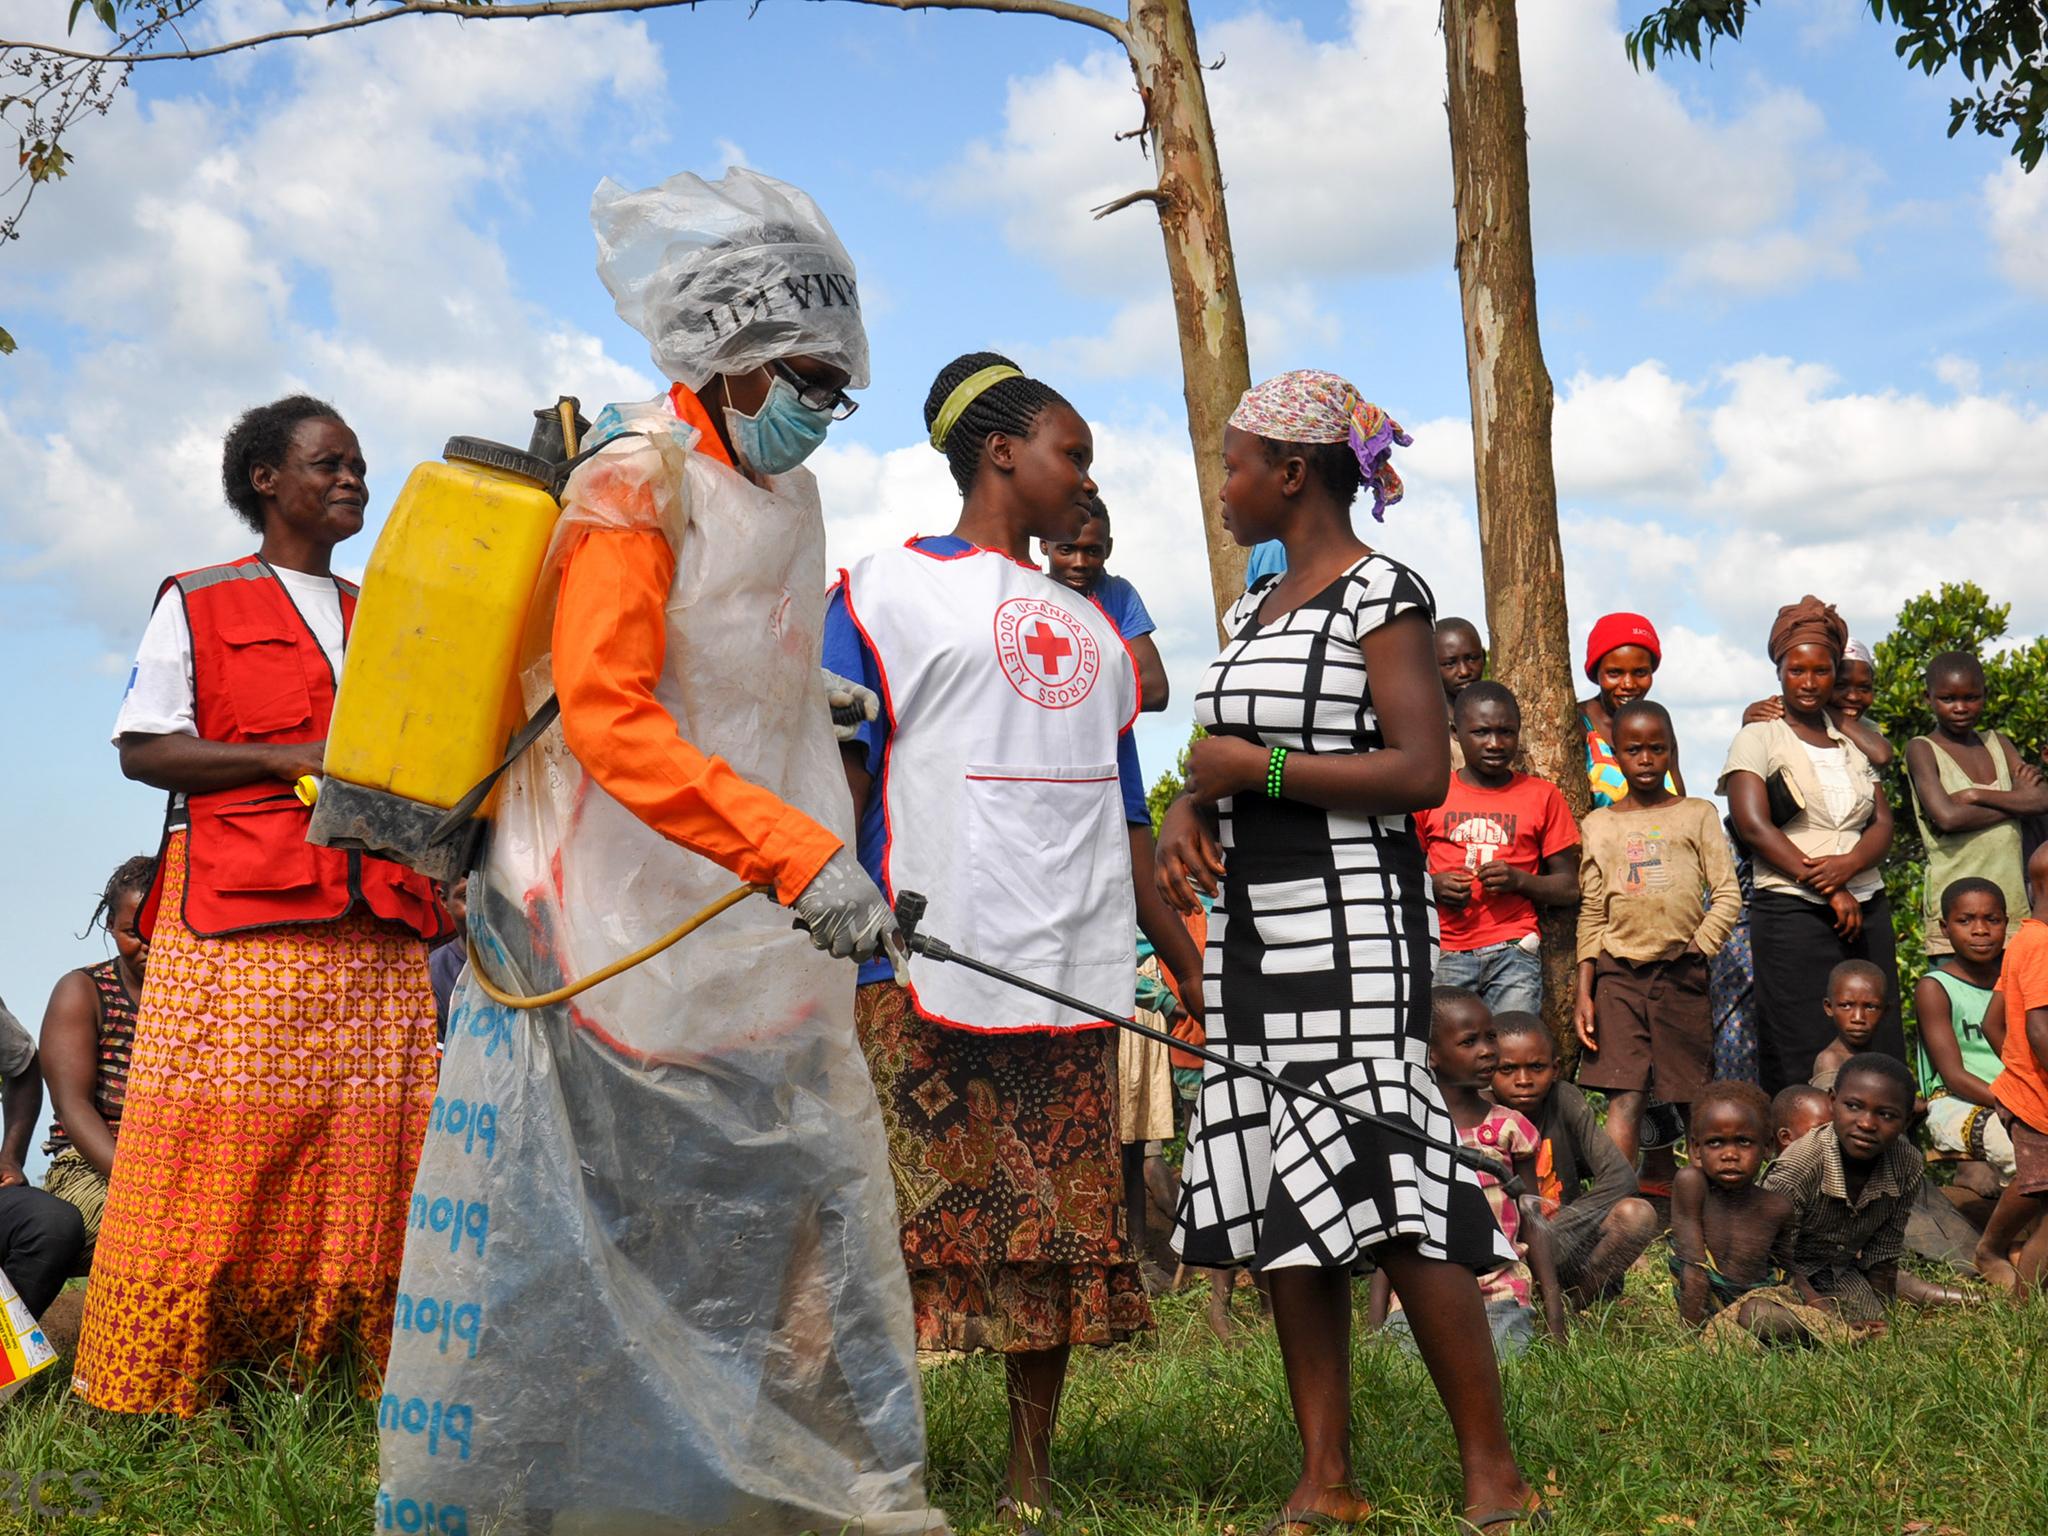 A scene from a play portraying the safe and dignified burial process. Uganda Red Cross uses theatre in communities to disseminate critical information about Ebola